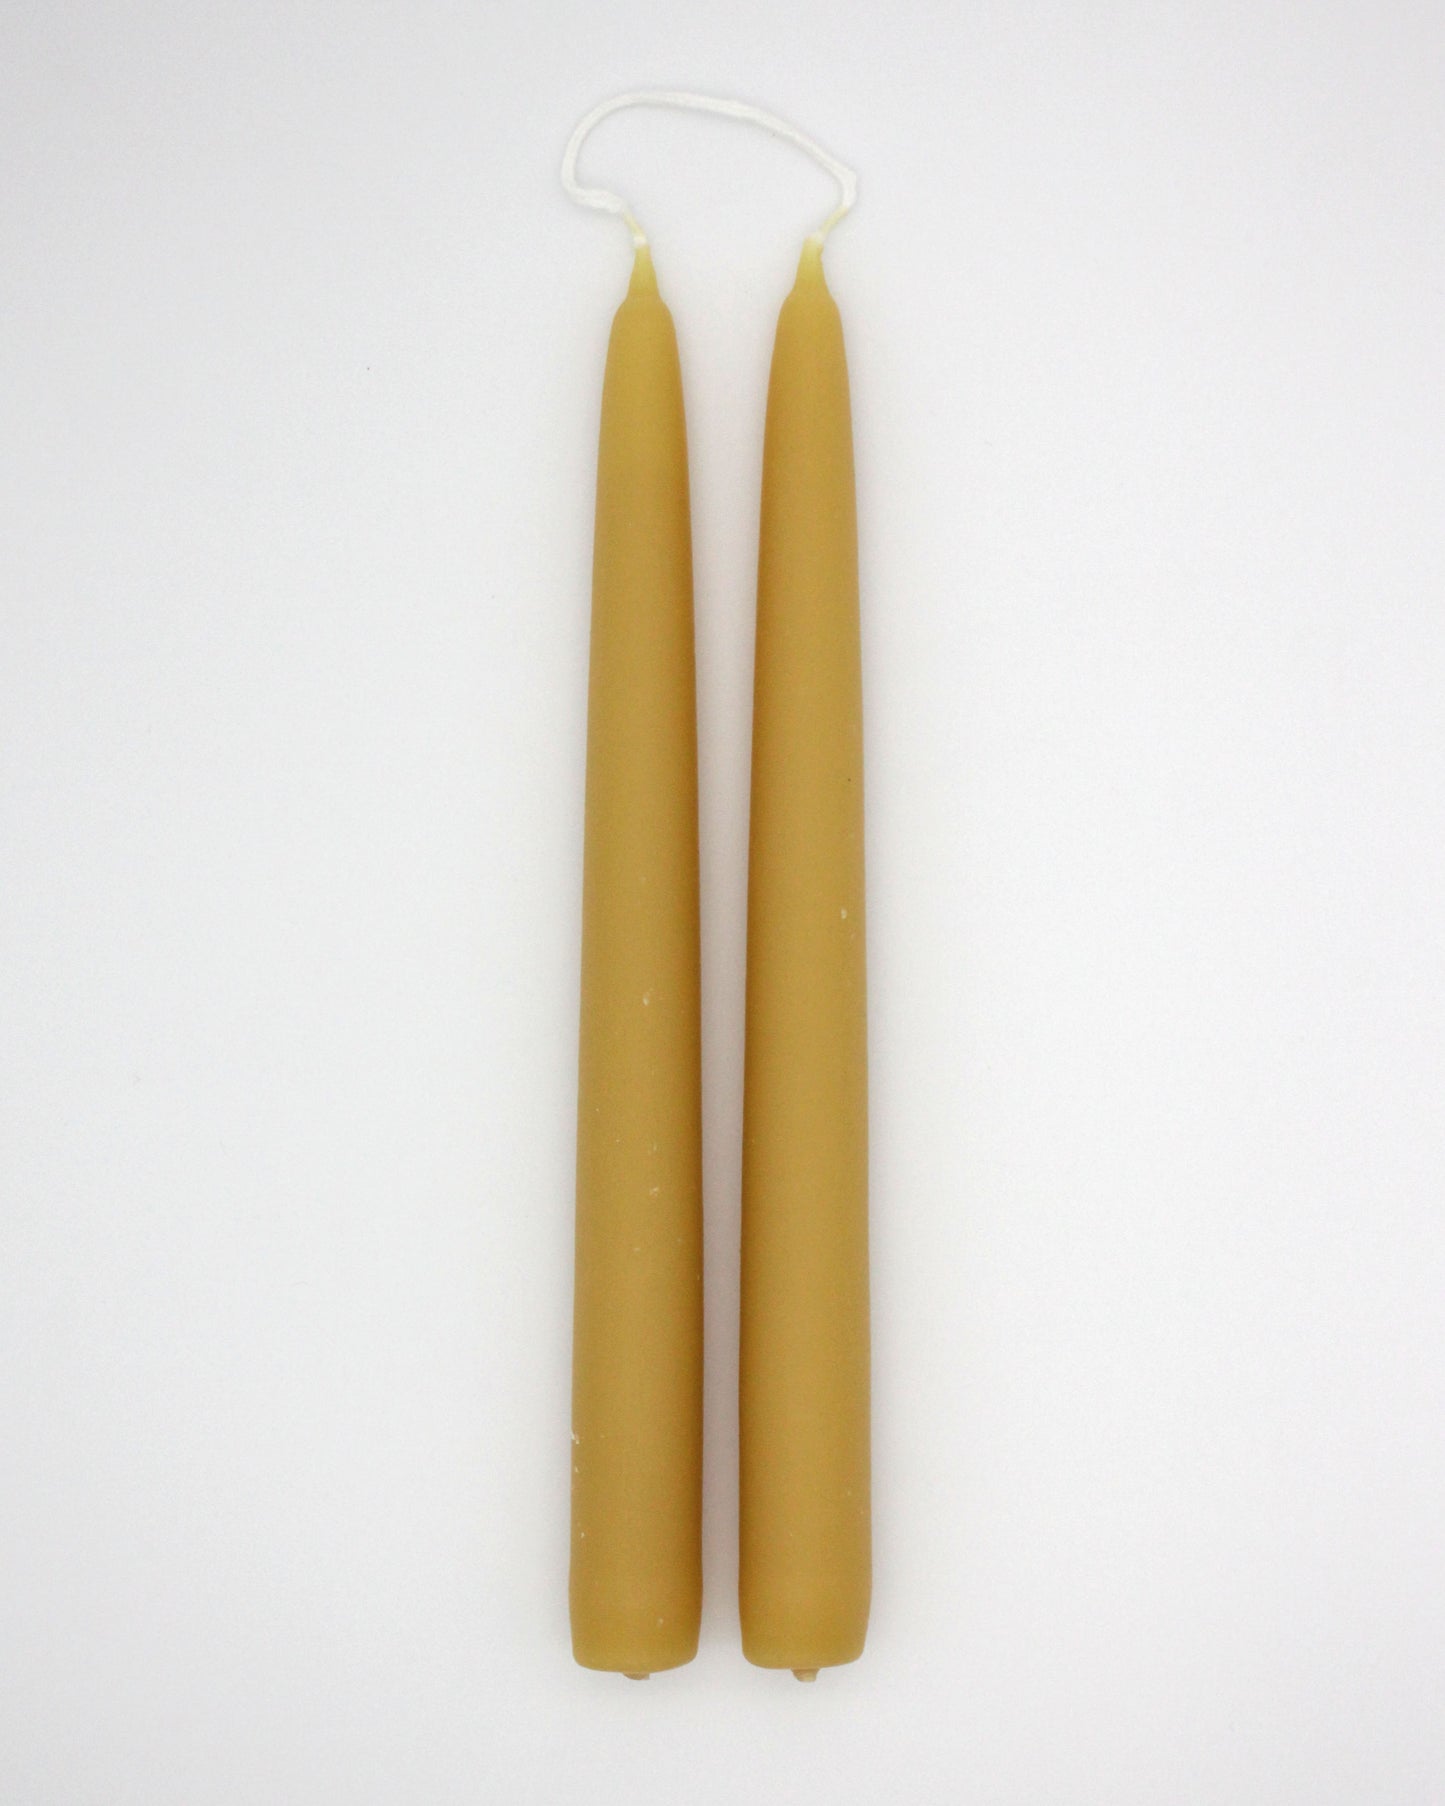 Tapered Beeswax Candle Pairs